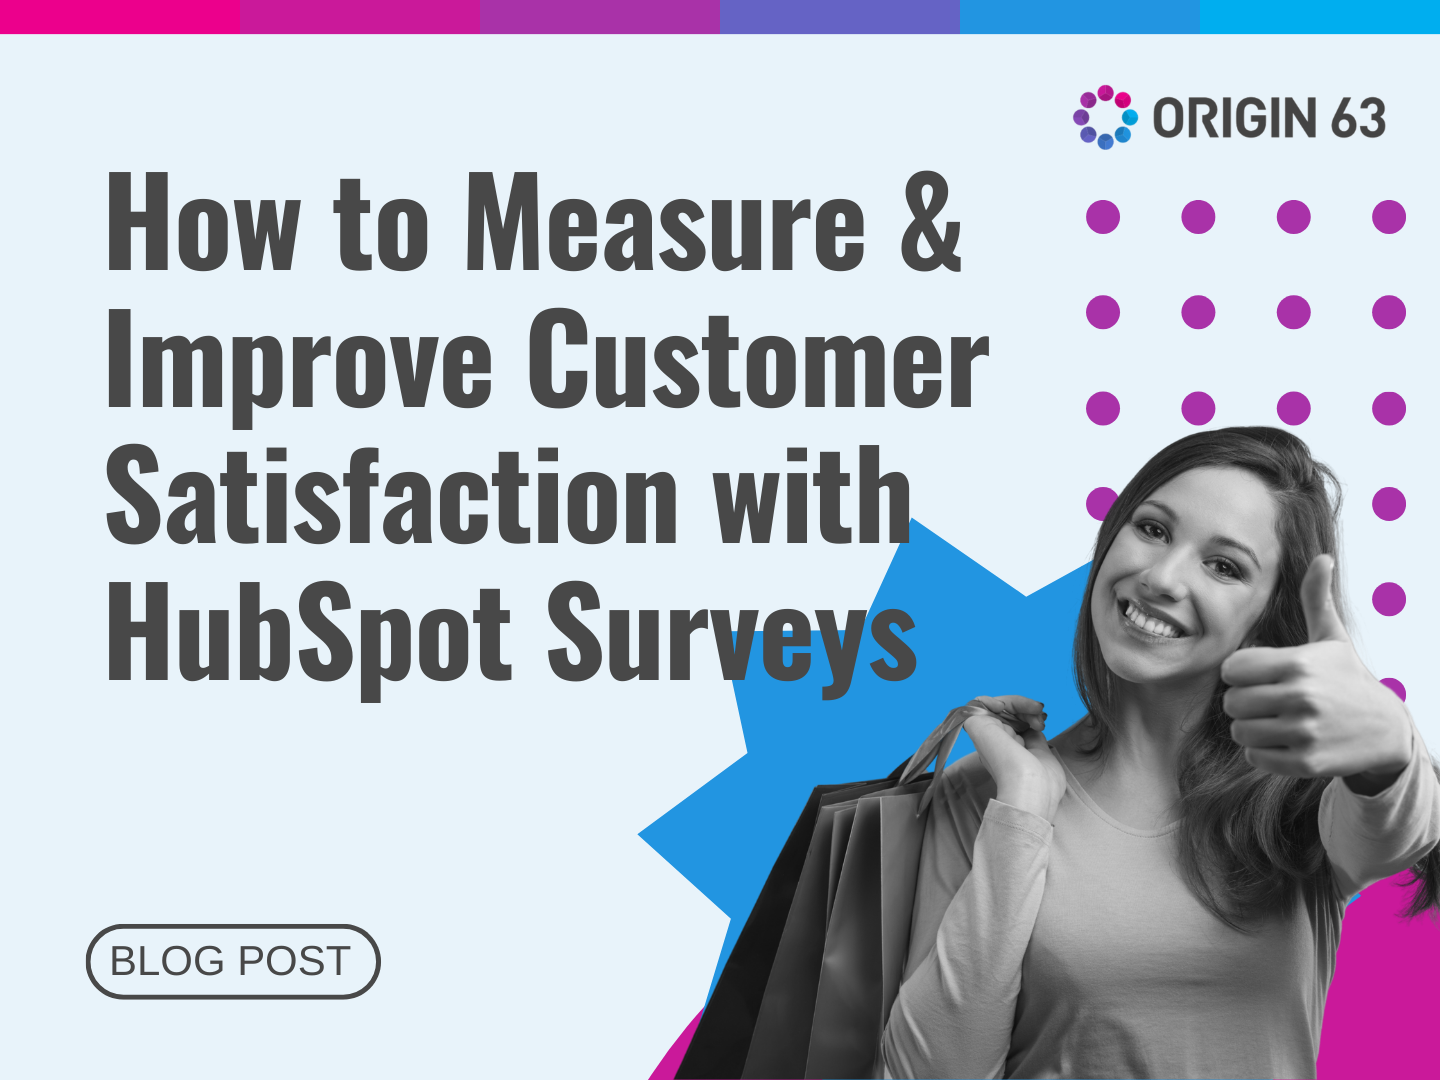 Master customer satisfaction with HubSpot Surveys. Gather valuable insights, drive loyalty, and boost success